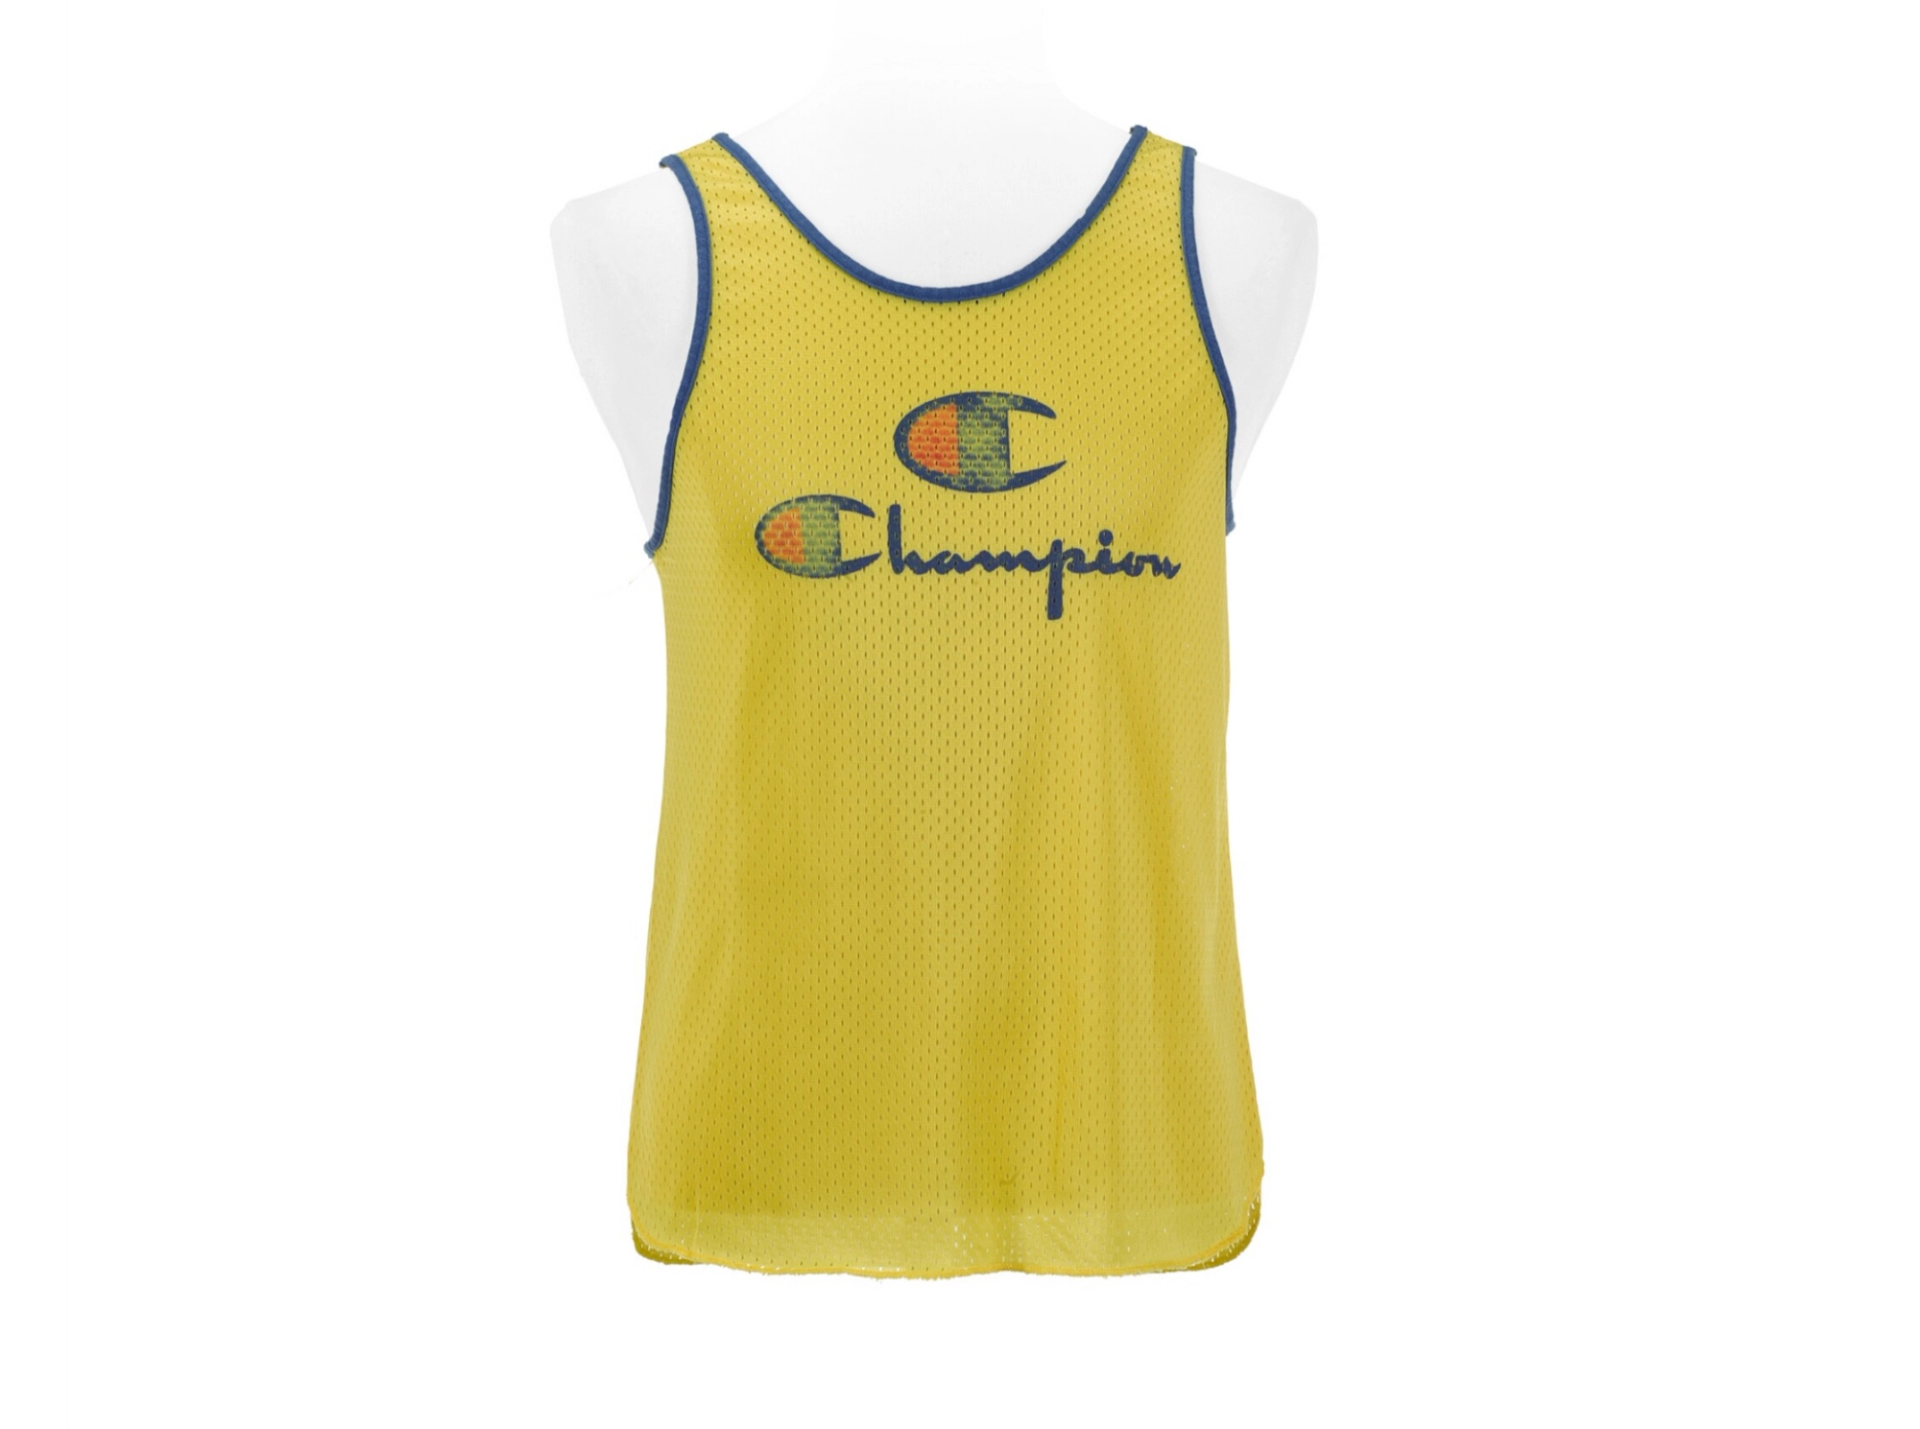 An image of a yellow Champion tank top, worn by Freddie Mercury for his final performance with Queen.